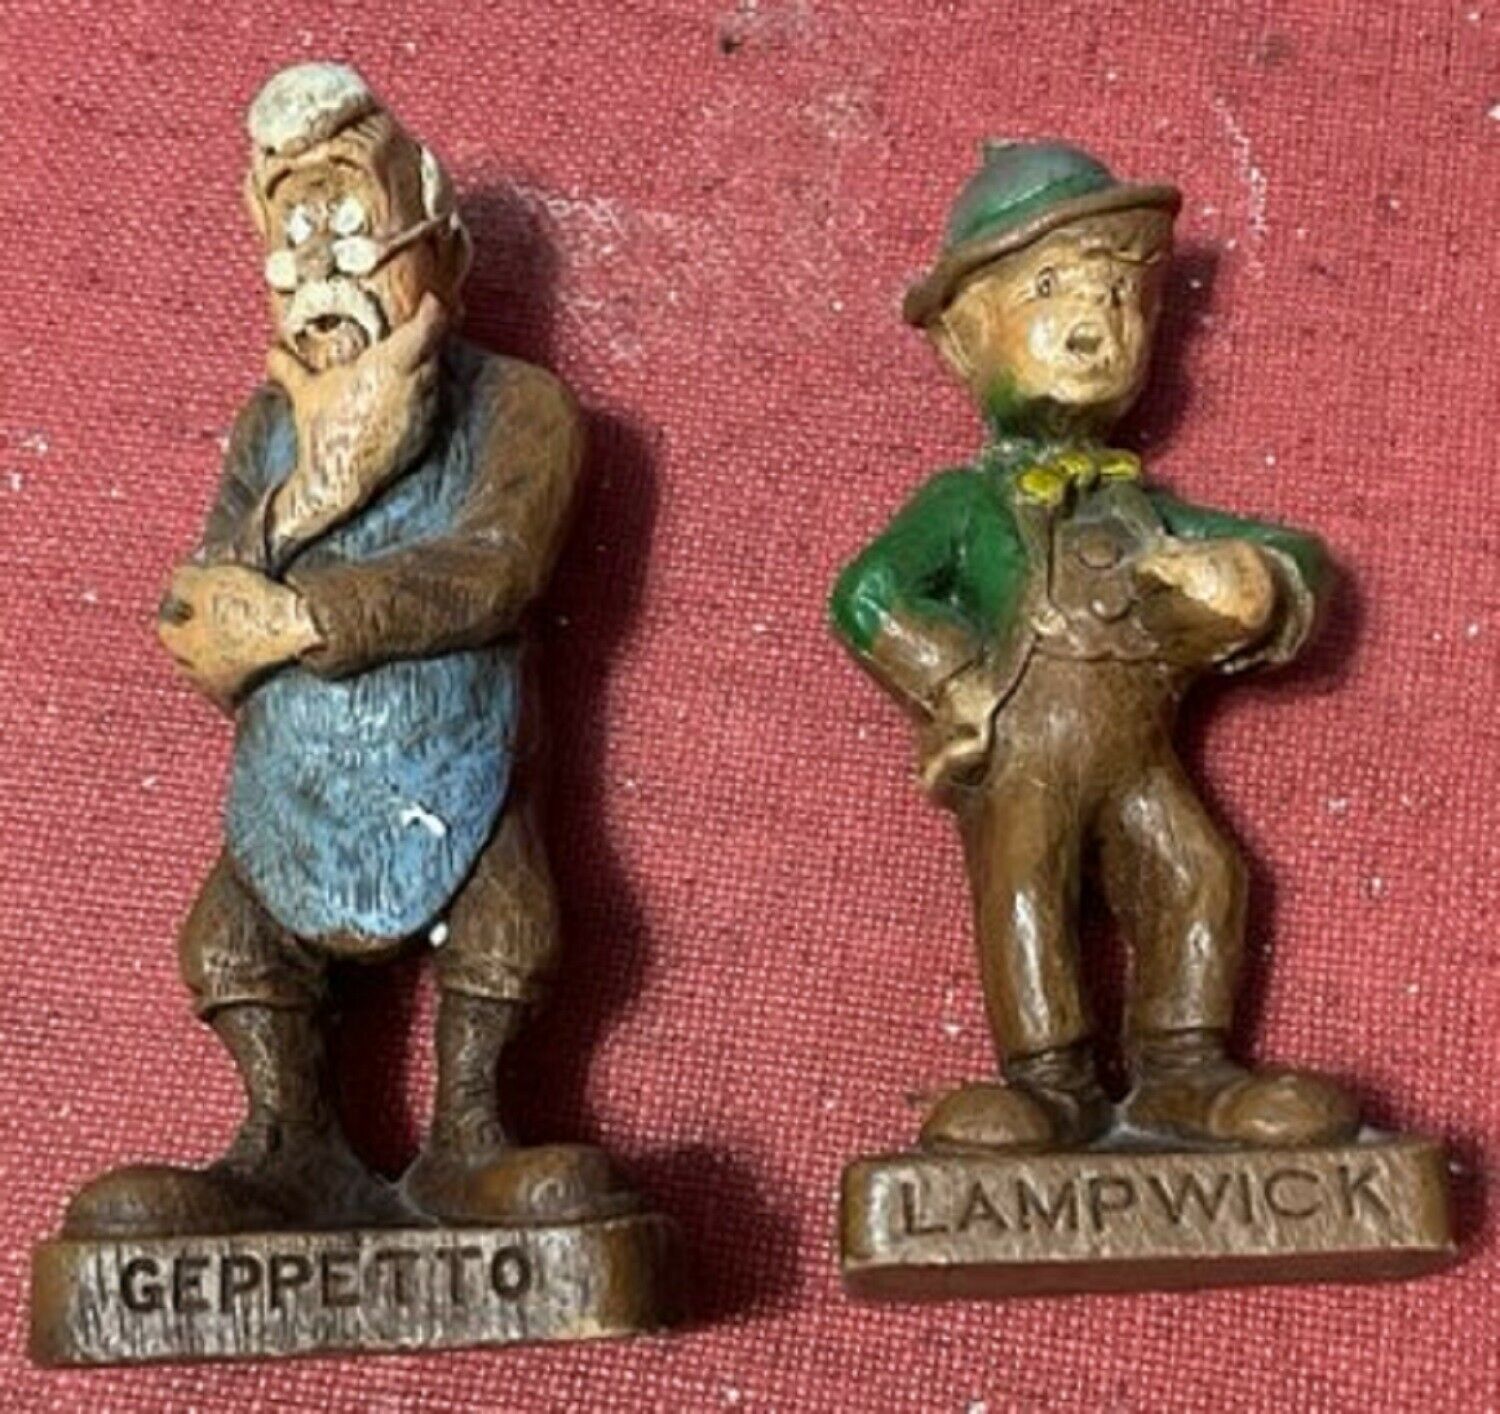 1940's Pinocchio Walt Disney Multi Products Chicago Geppetto & Lampwick Figures